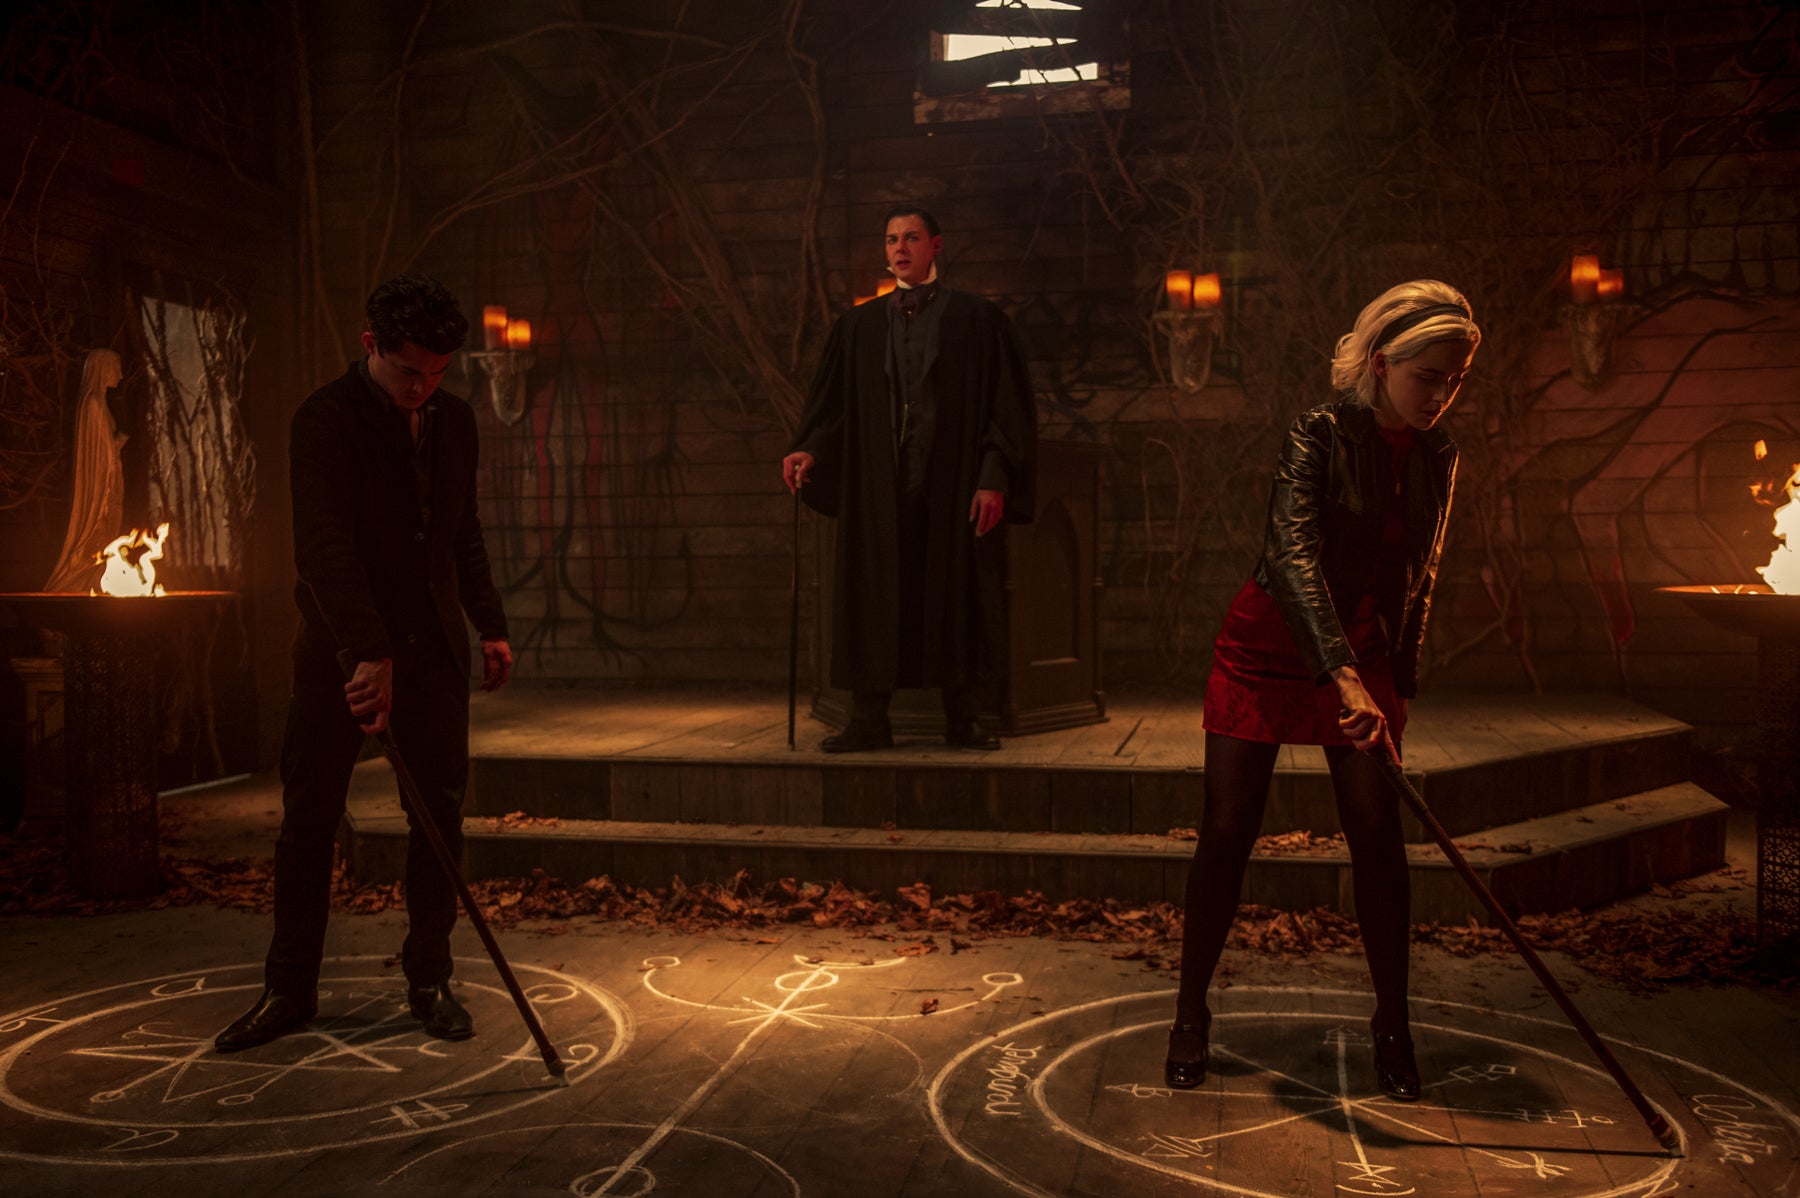 Sabrina Spellman and Nick draw symbols on the ground during a match for Top Boy in a scene from Chilling Adventures of Sabrina.